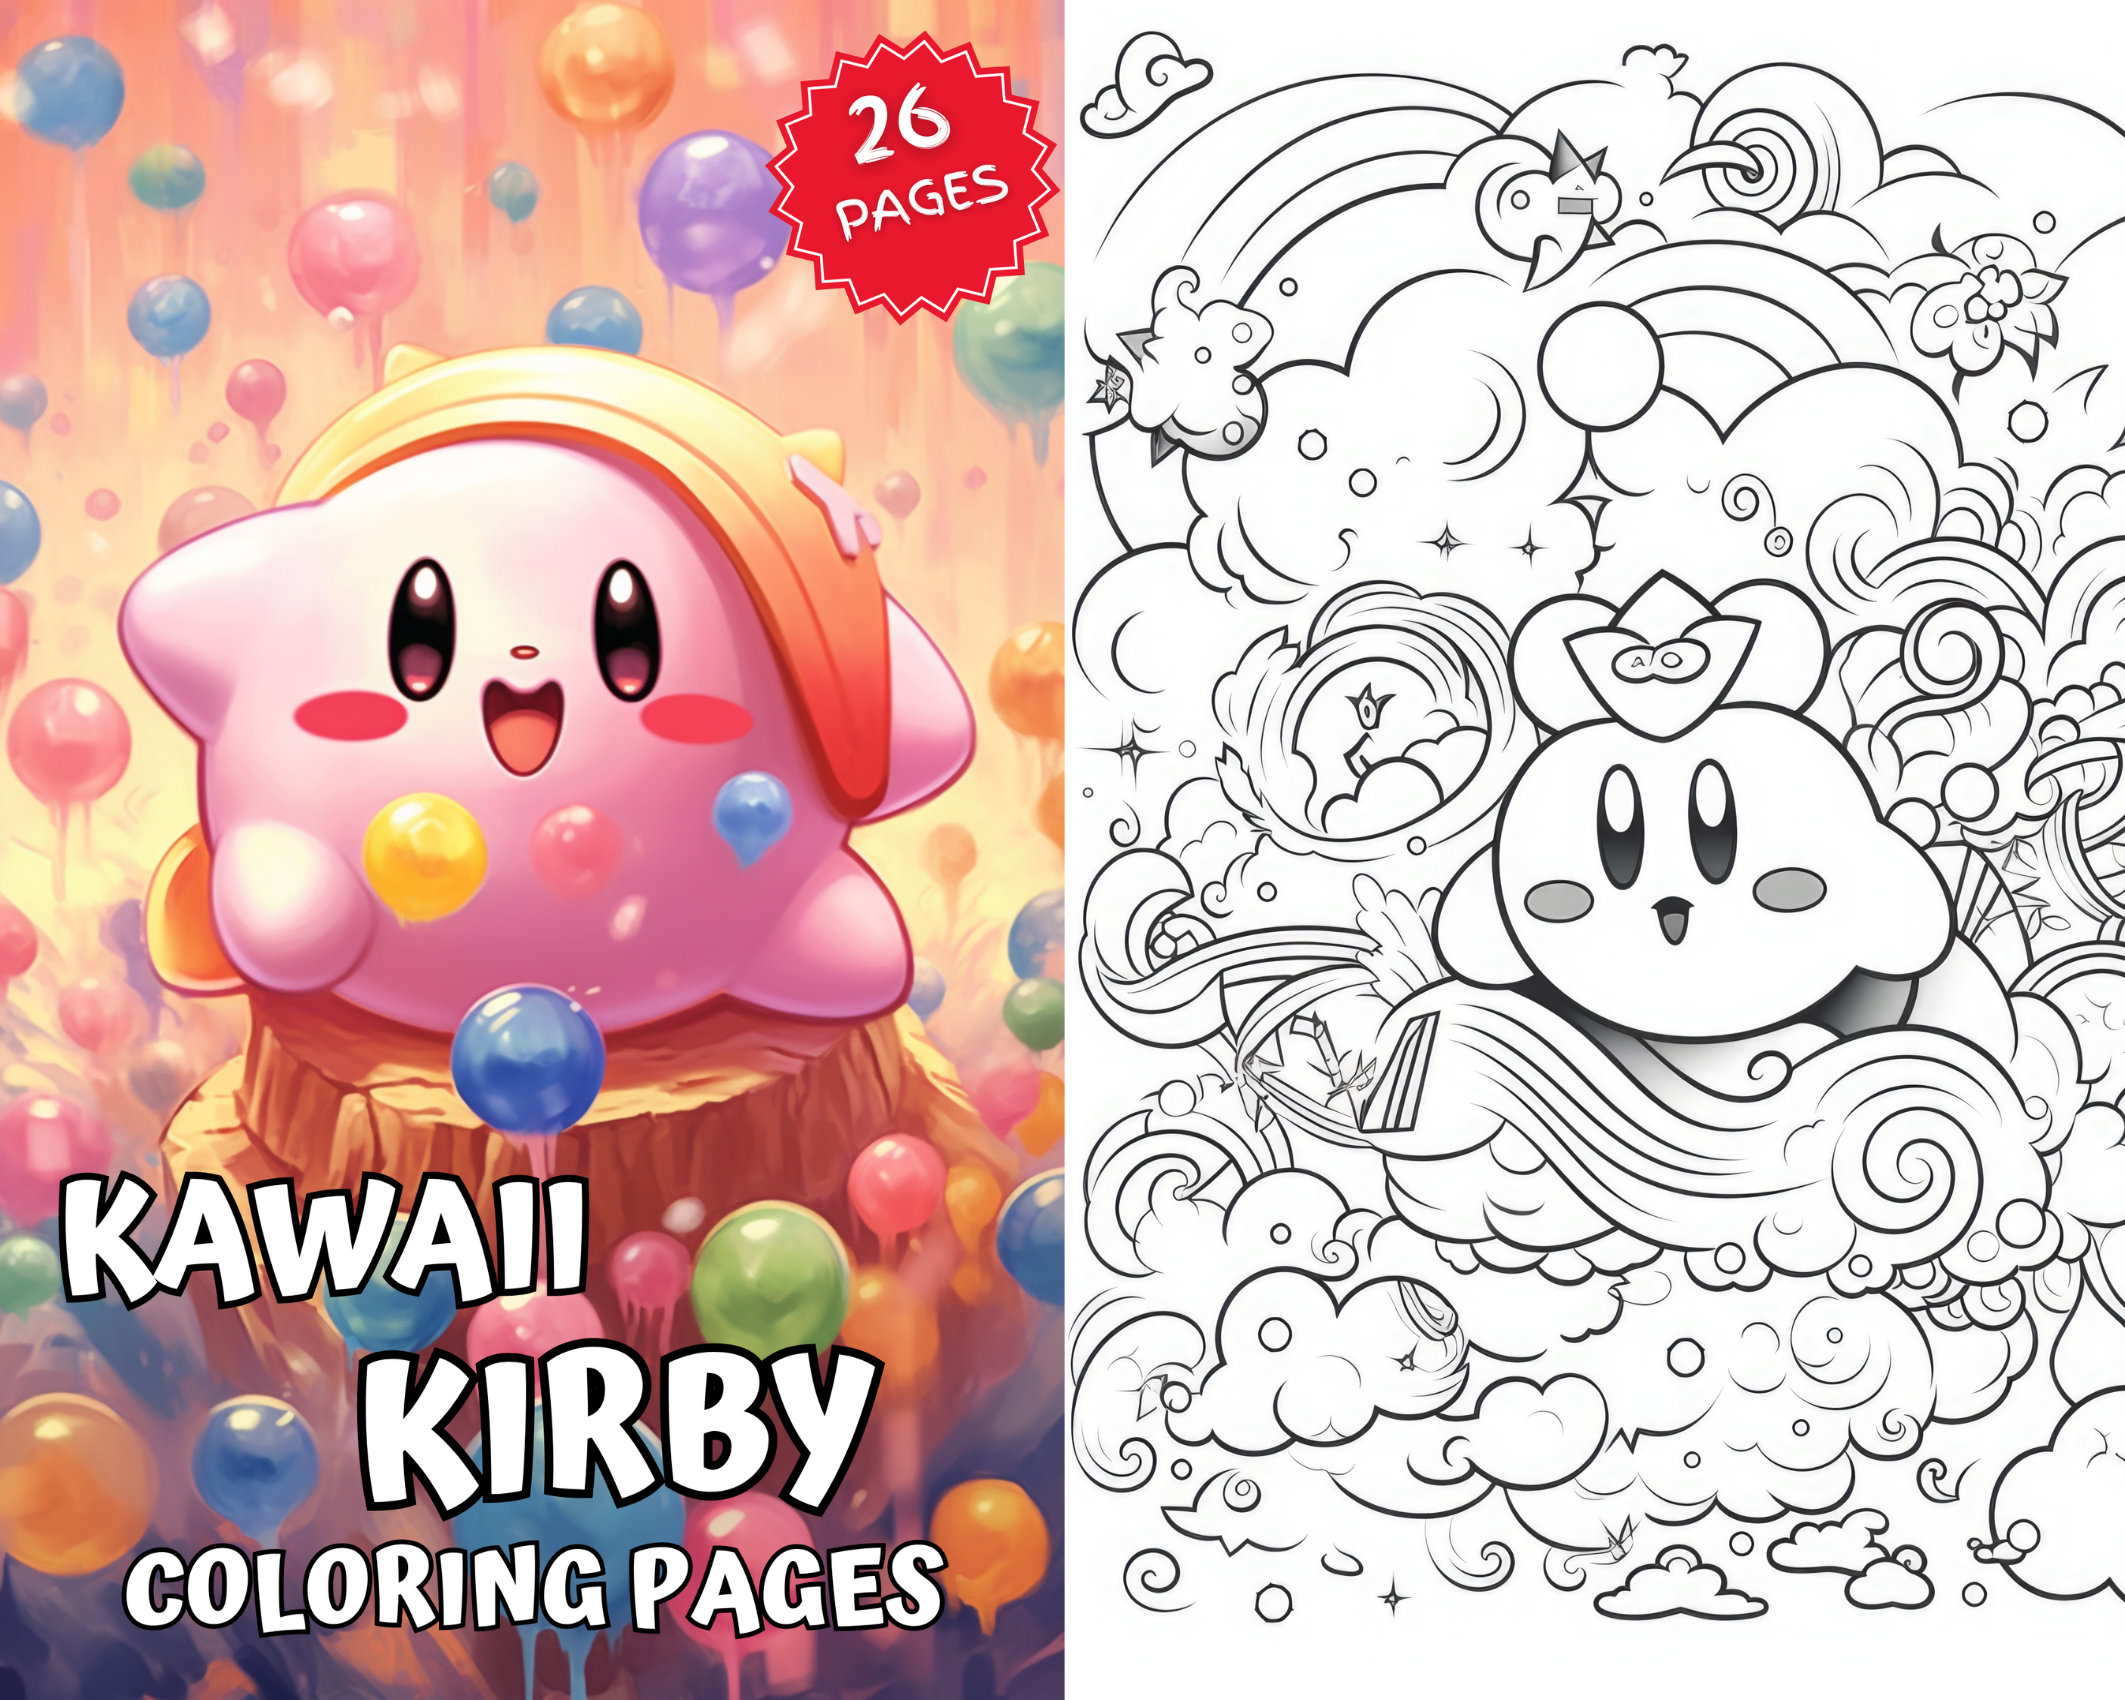 Kirby coloring pages kawaii kirby coloring pages printable digital download kirby kawaii coloring pages